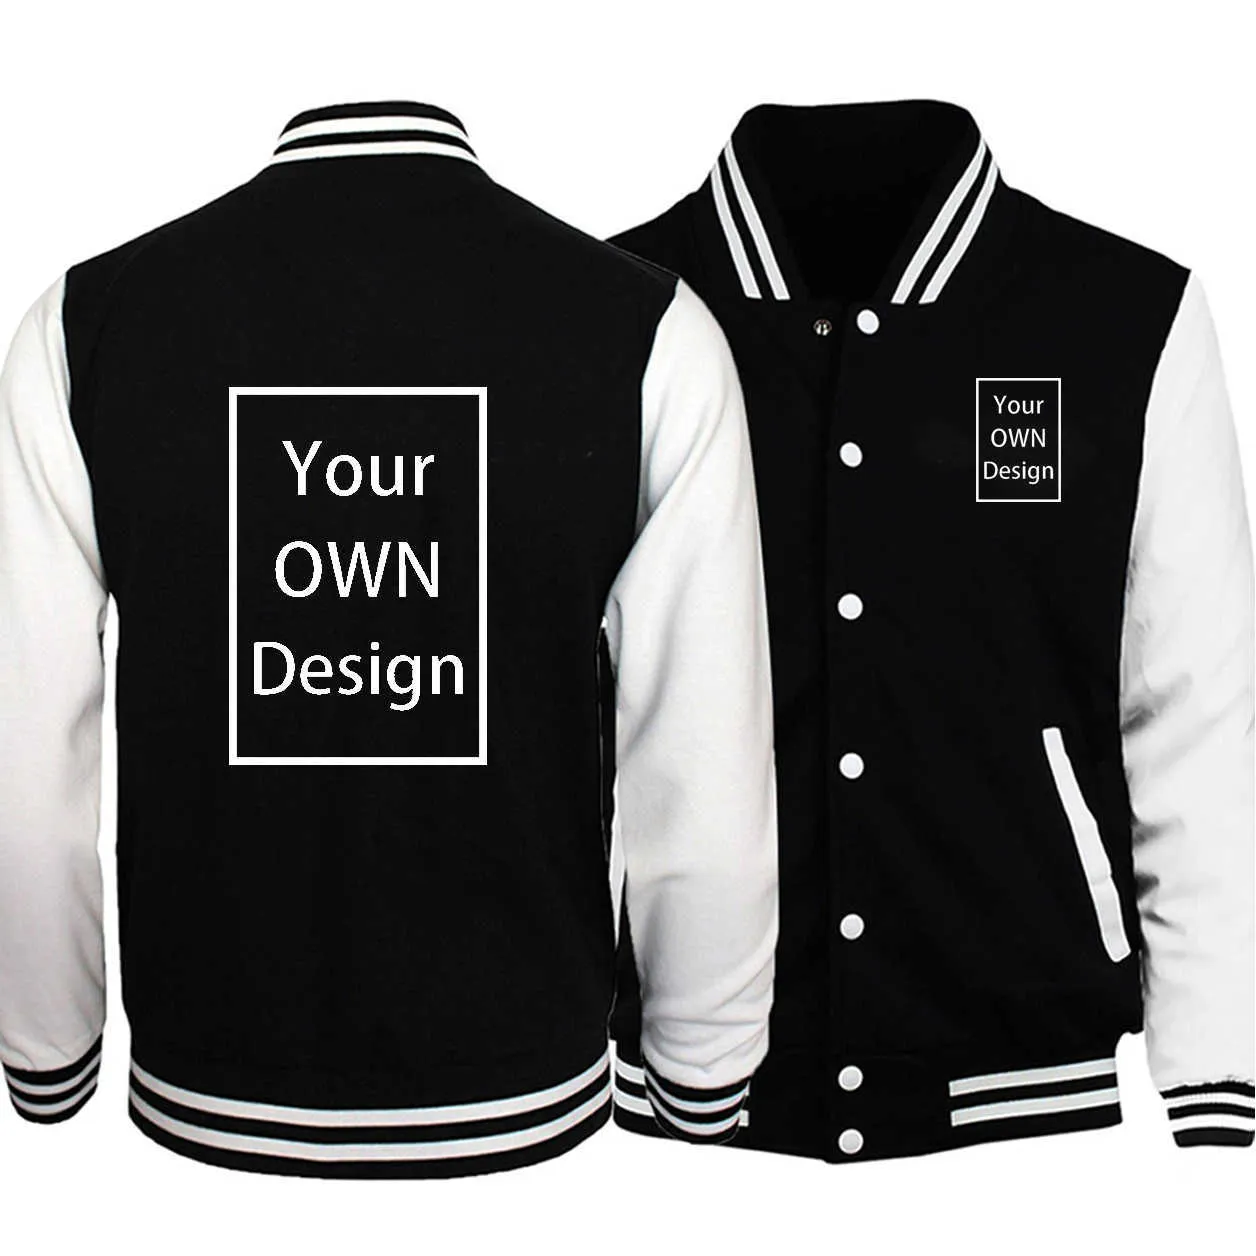 Your OWN Design Brand /Picture Custom Unisex DIY Winter Fleece Jacket Casual Hoody Clothing black white Tracksuit Fashion